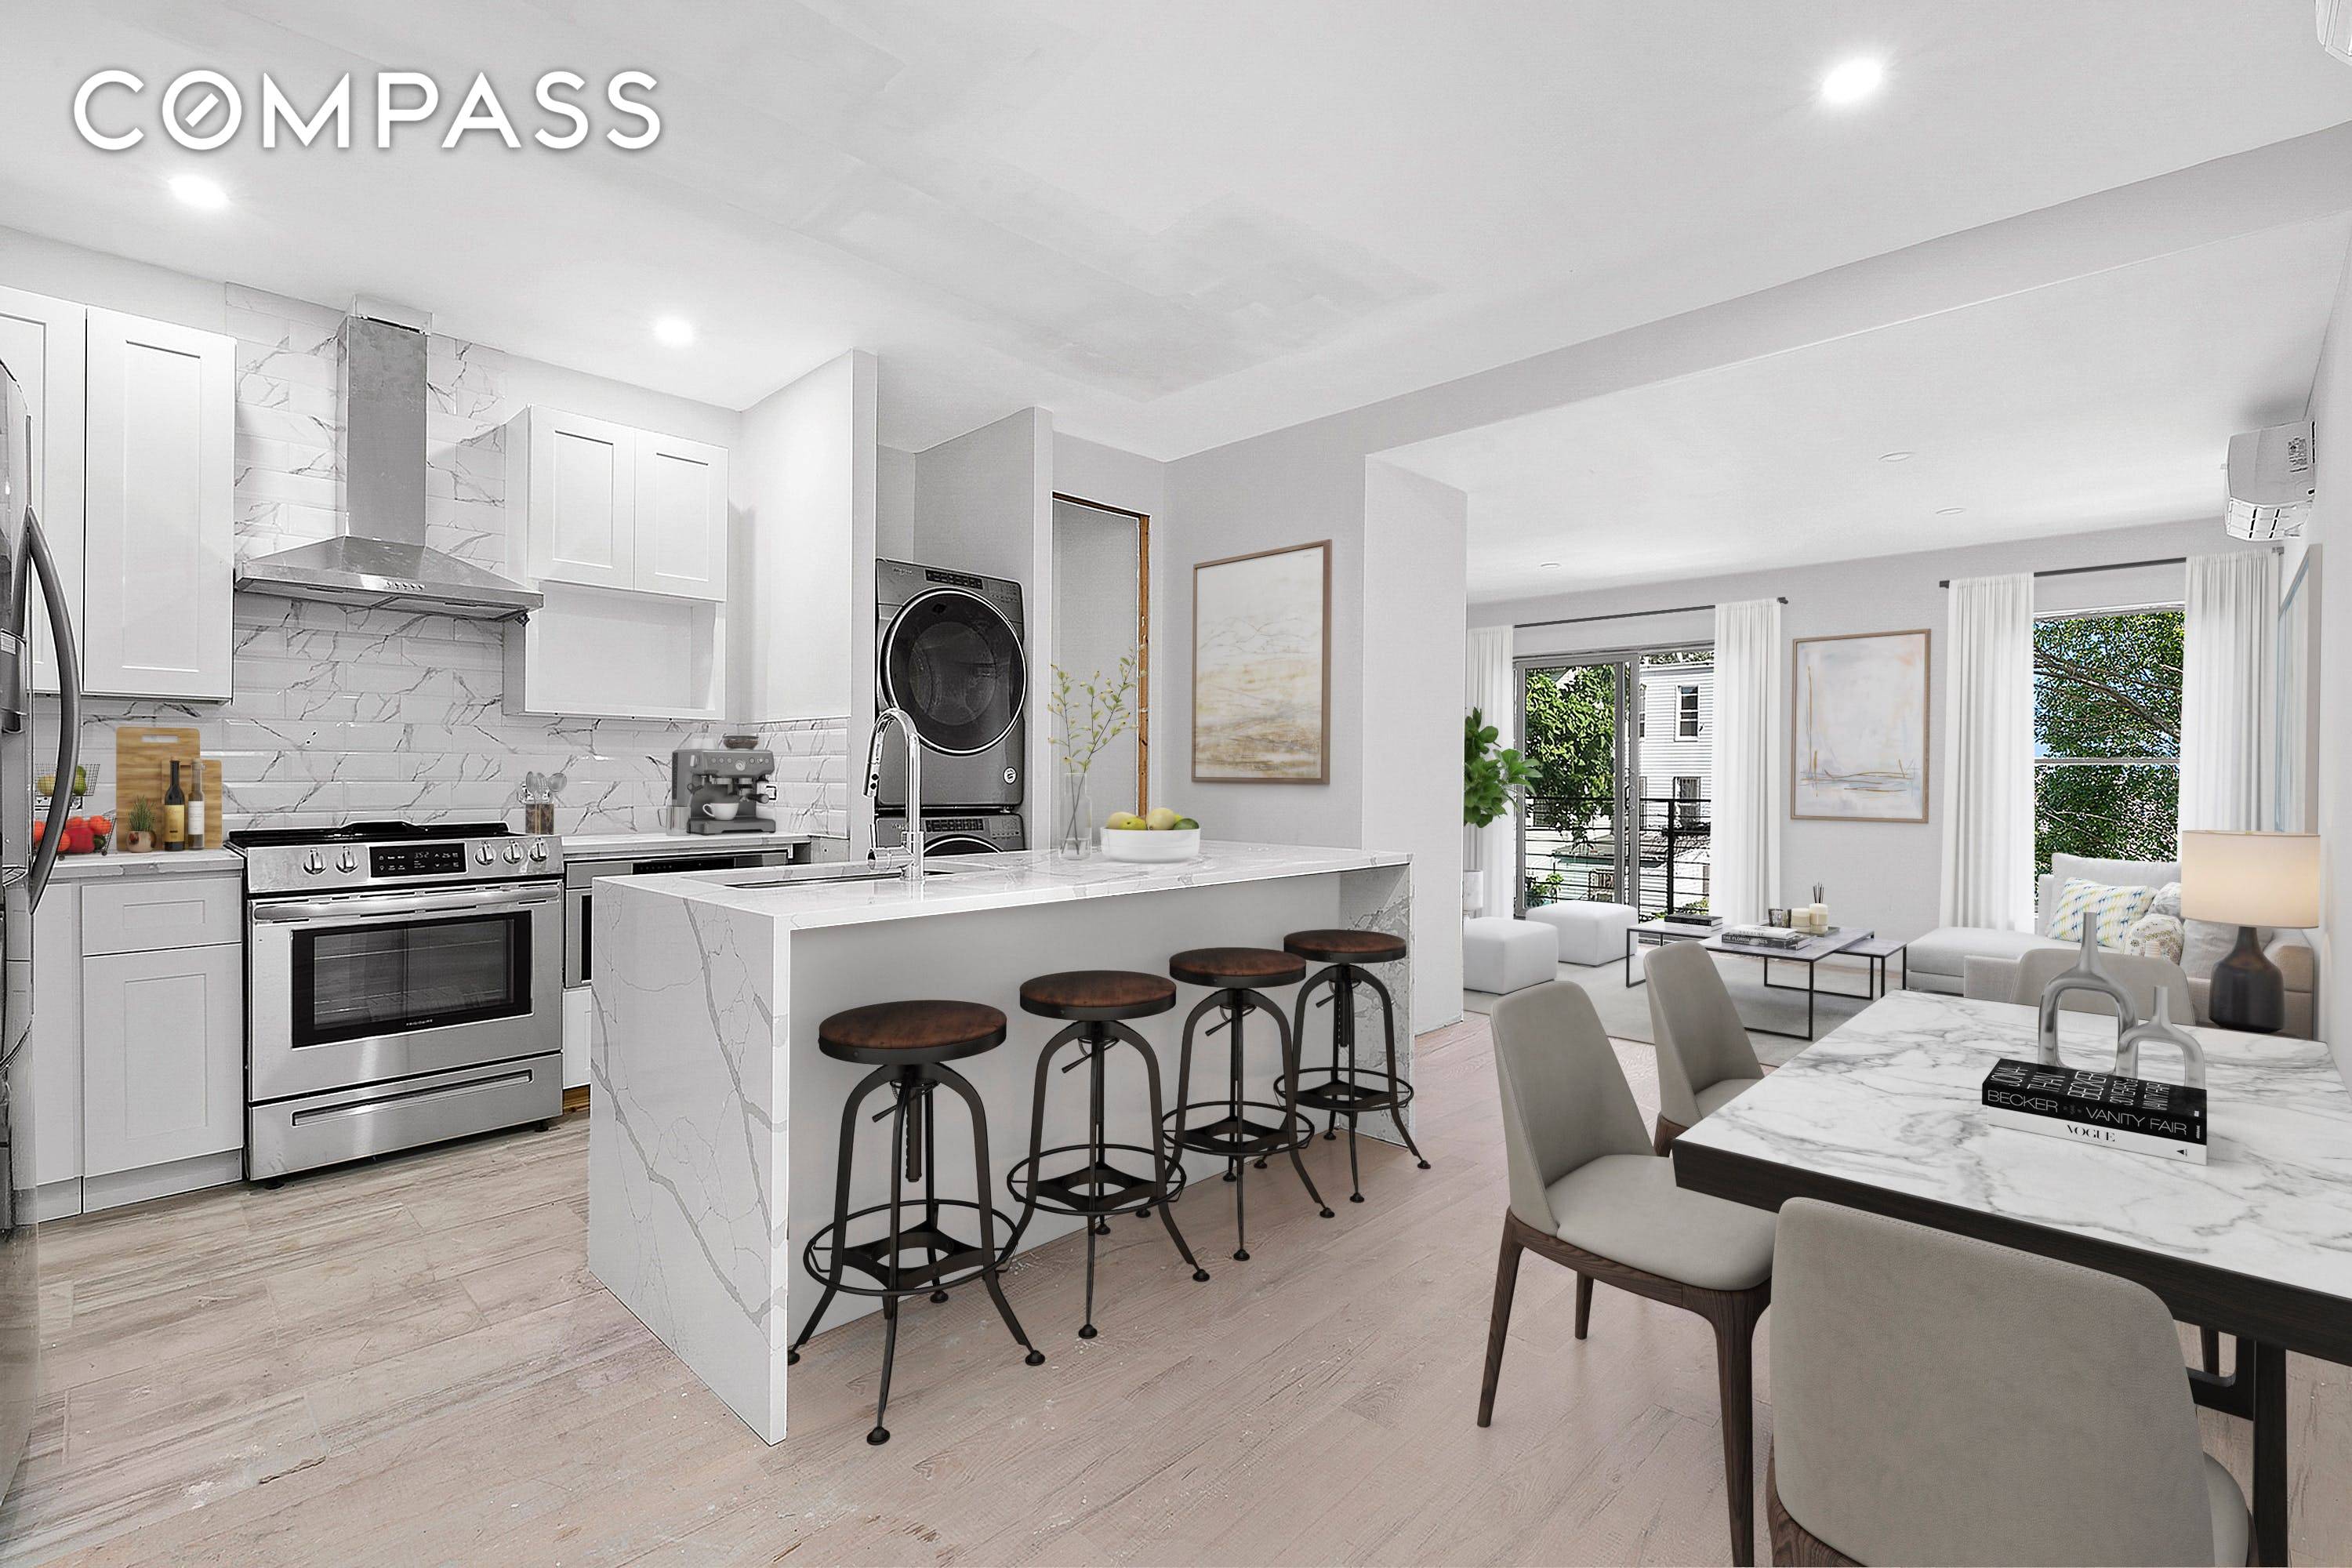 This beautifully gut renovated two family townhouse offers premium finishes and an outstanding location at the border of Bushwick and Bedford Stuyvesant.